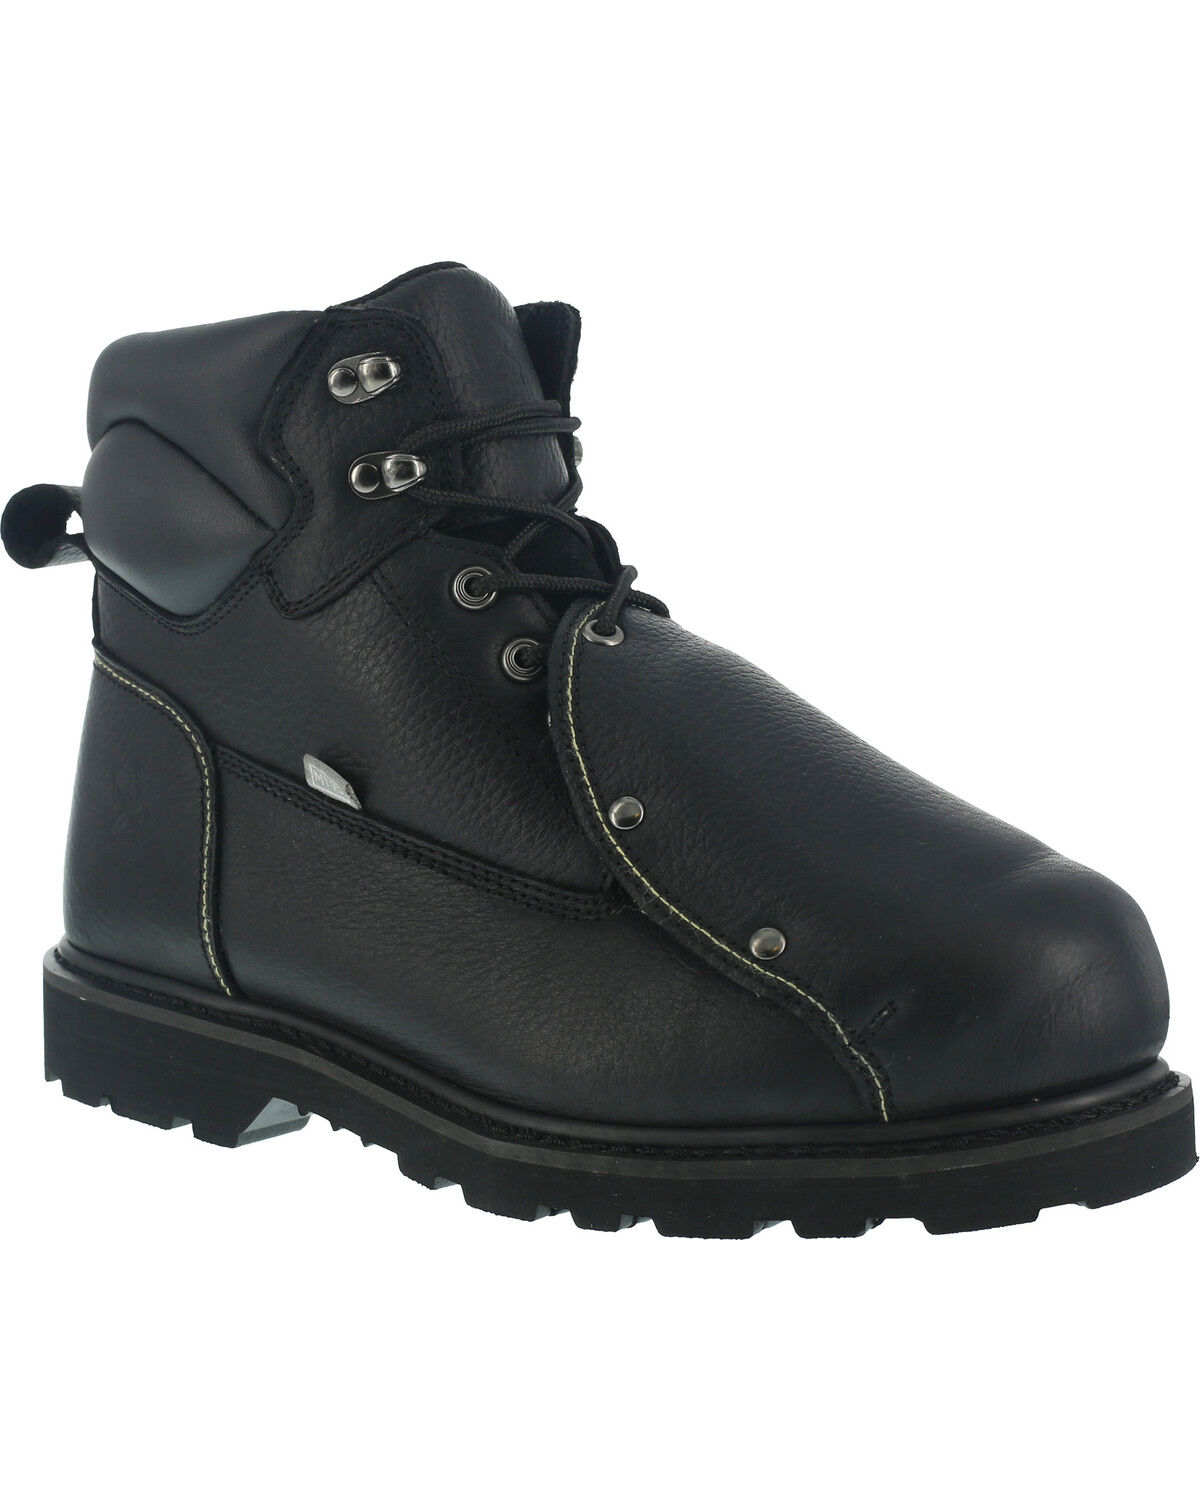 mens steel toe boots with metatarsal guard